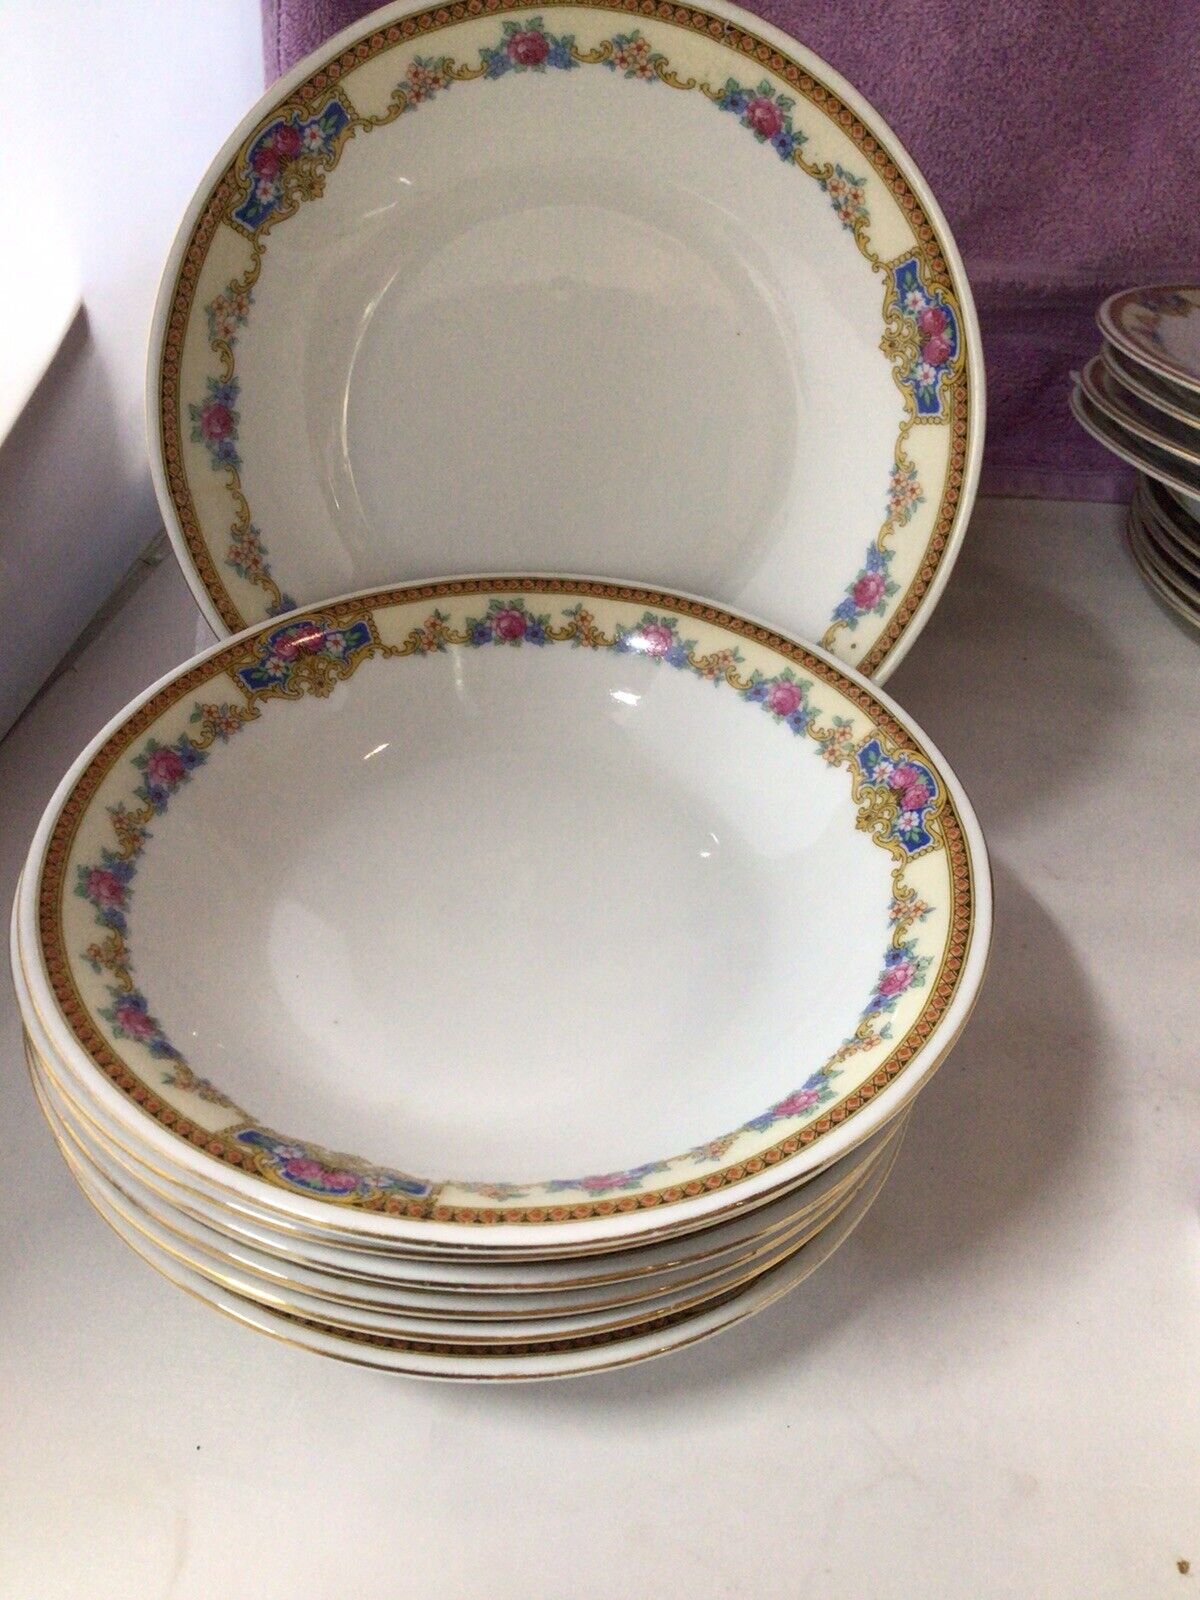 Victoria China Made In Czechoslovakia. In 1920-1930  Close To One Hundred Yrs Ol